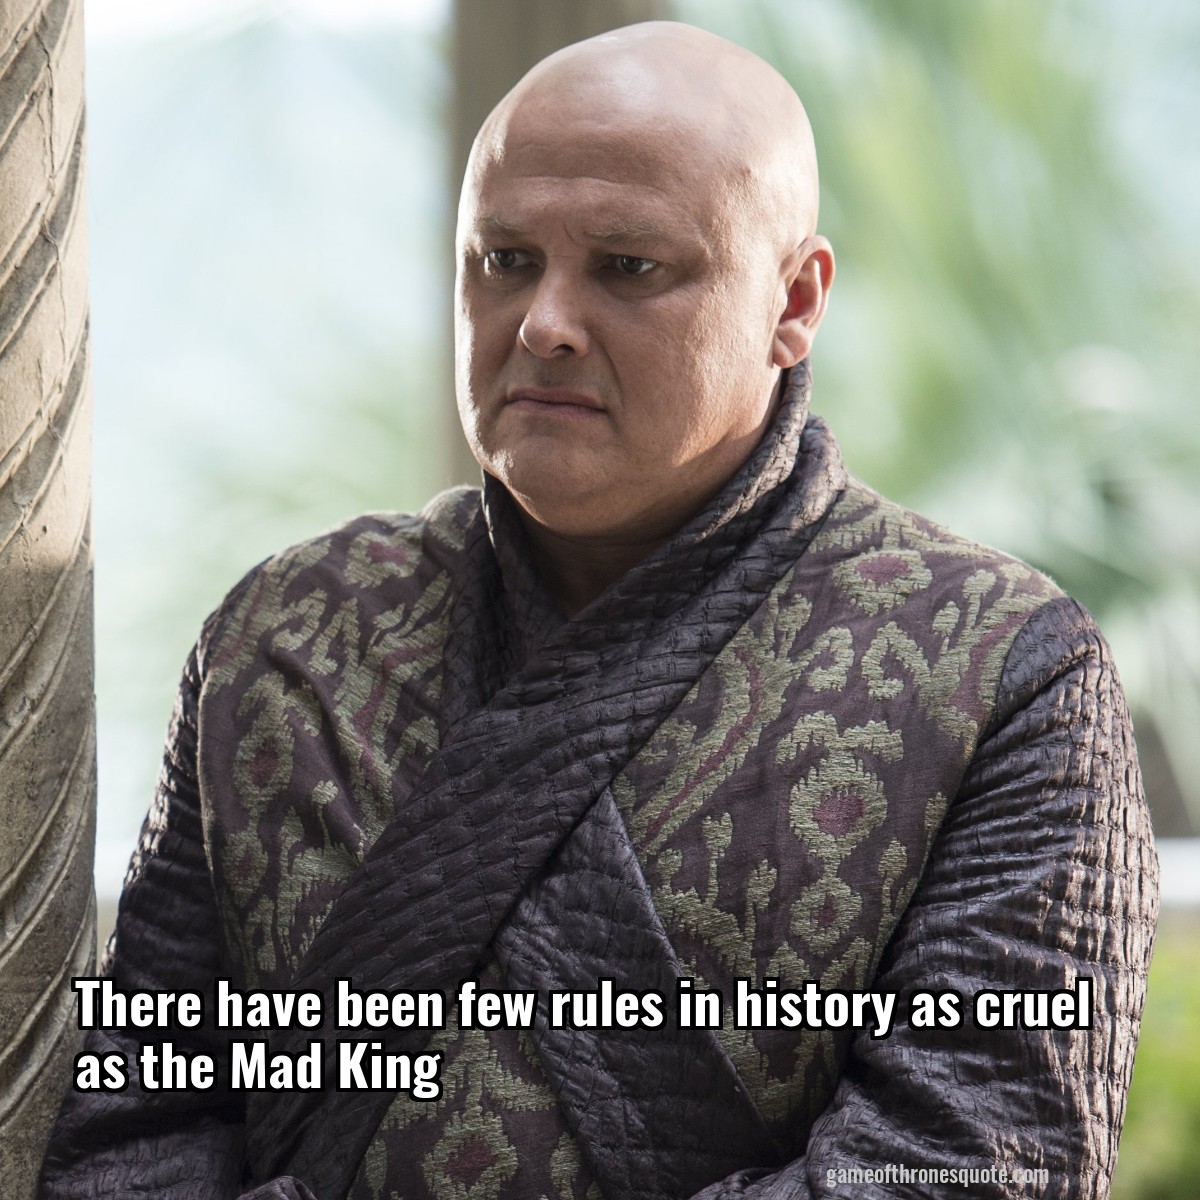 There have been few rules in history as cruel as the Mad King